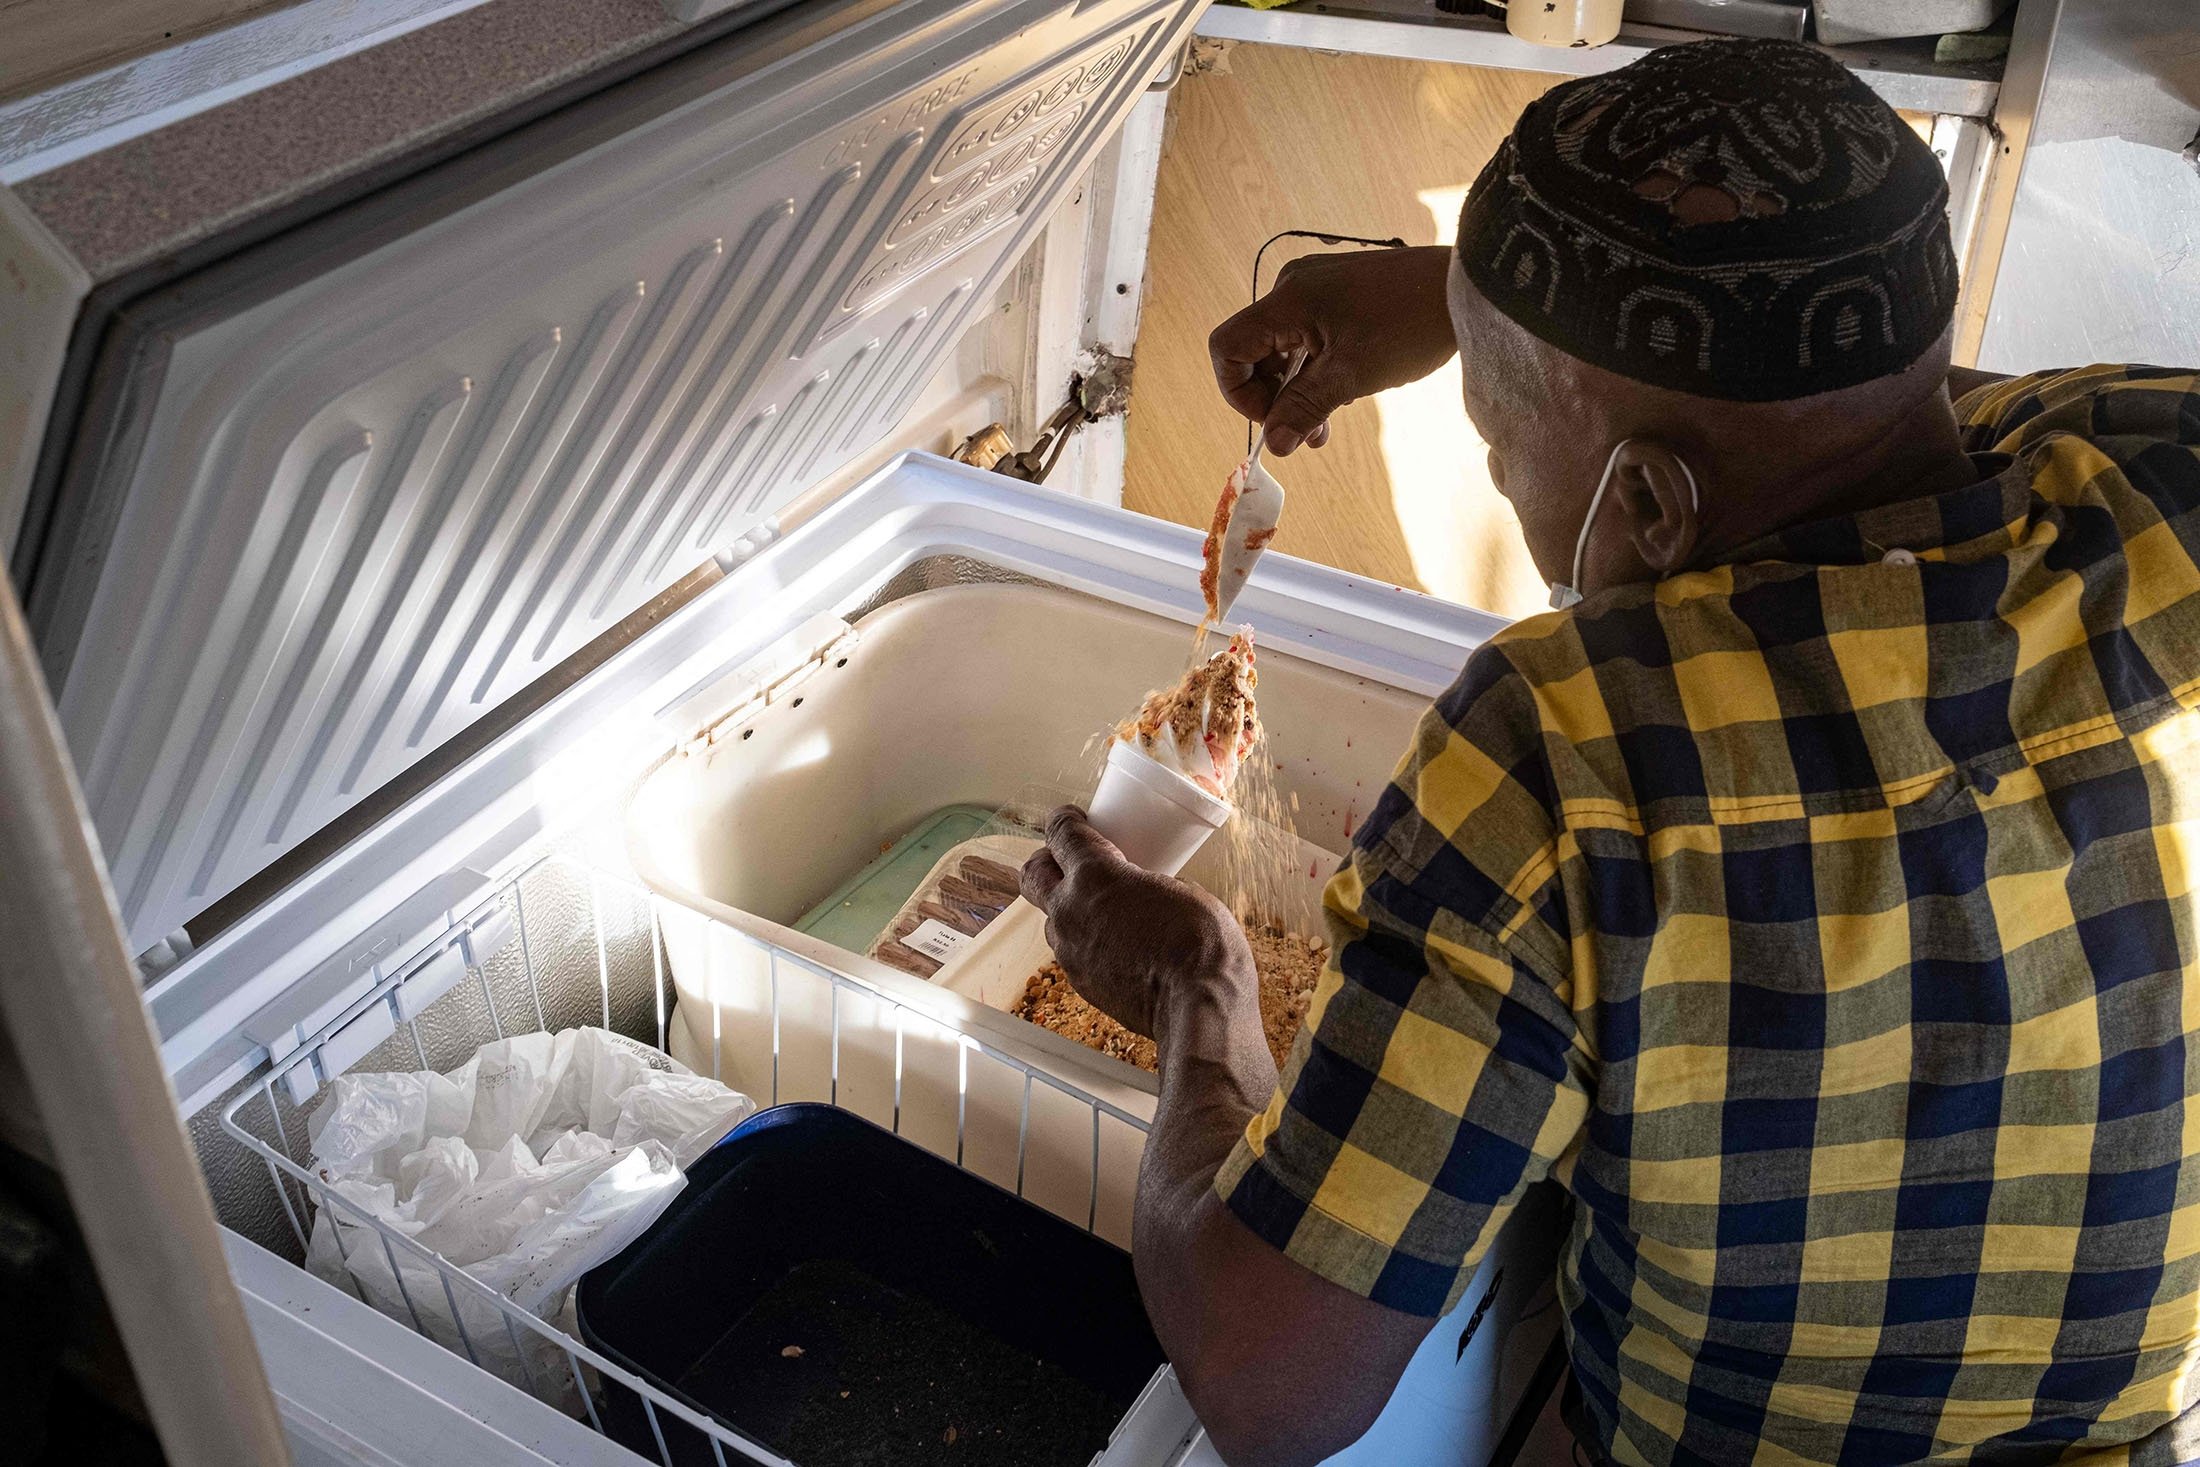 The owner of an ice cream truck, Sipho Mtshali, adds toppings to an ice cream cup for a clustomer in Soweto, South Africa, Nov. 19, 2021. (AFP Photo)